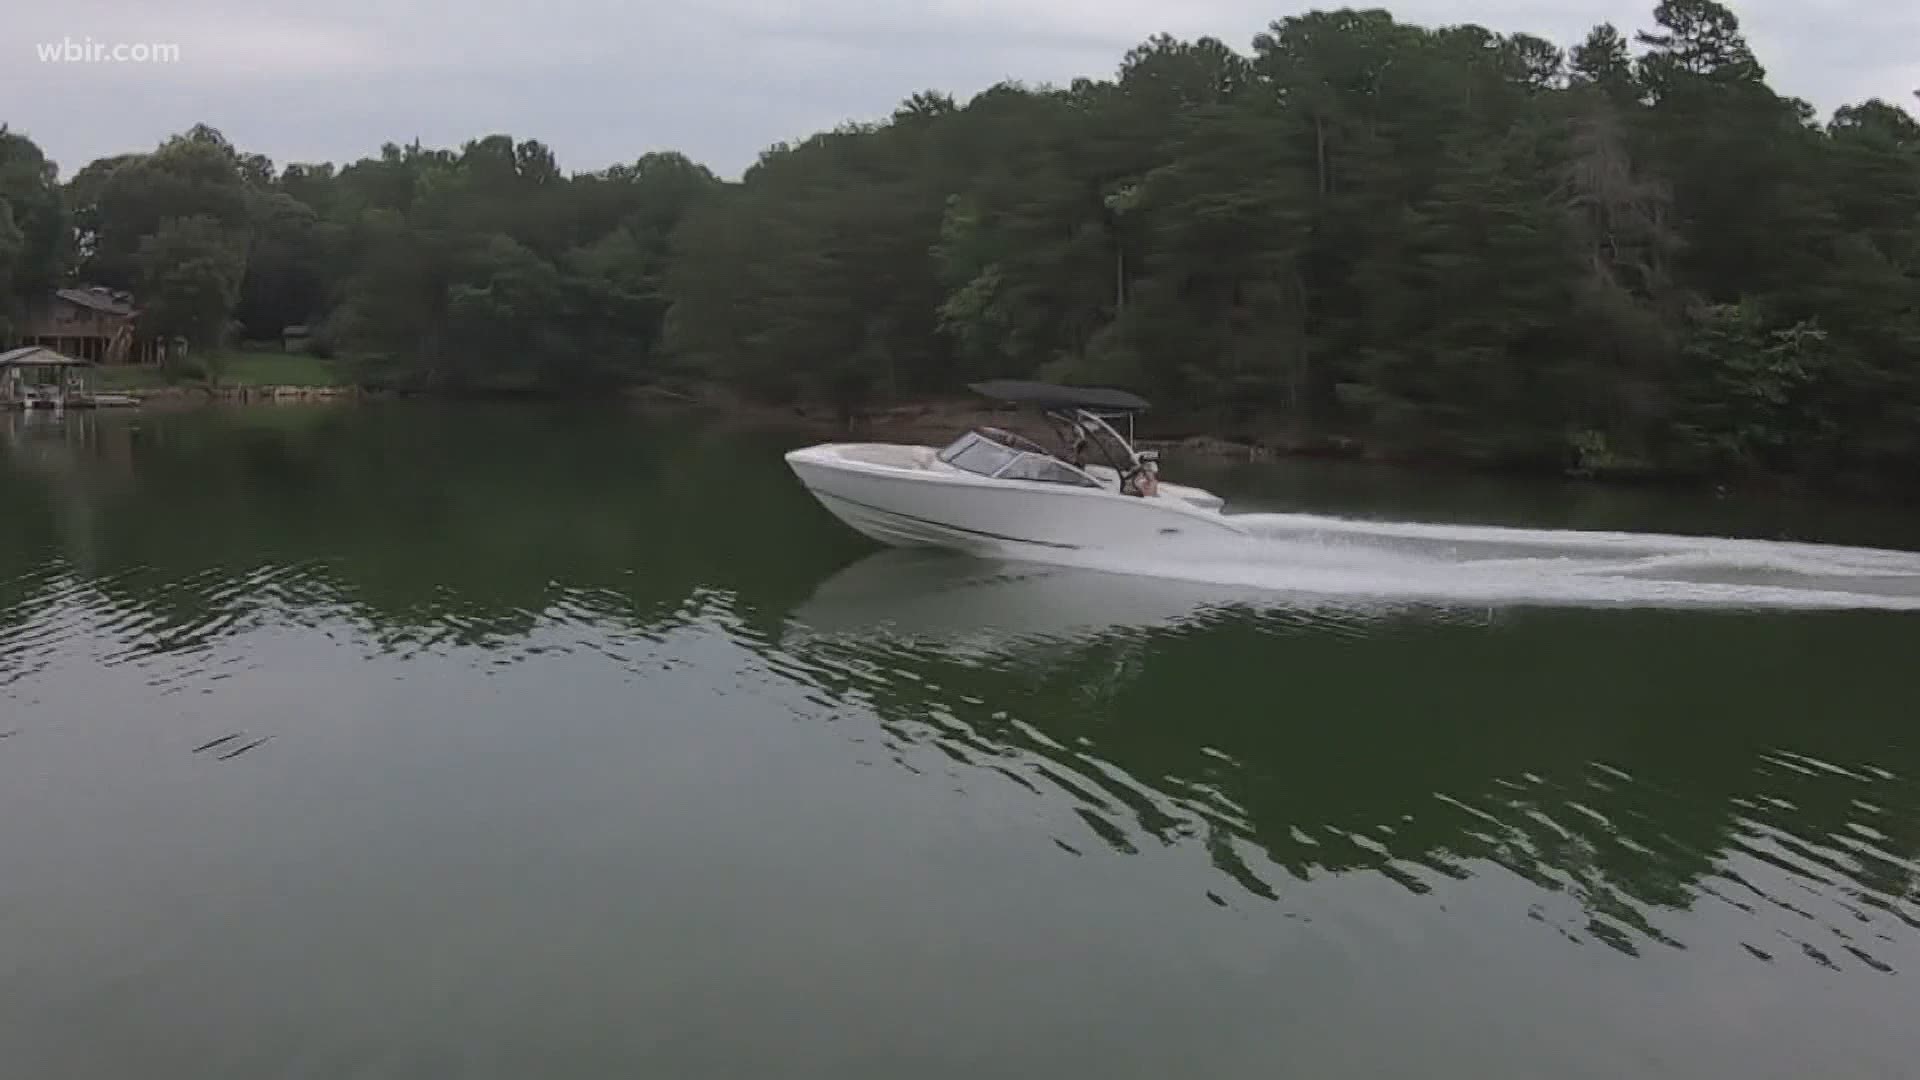 Tips for boating over the weekend to stay safe.